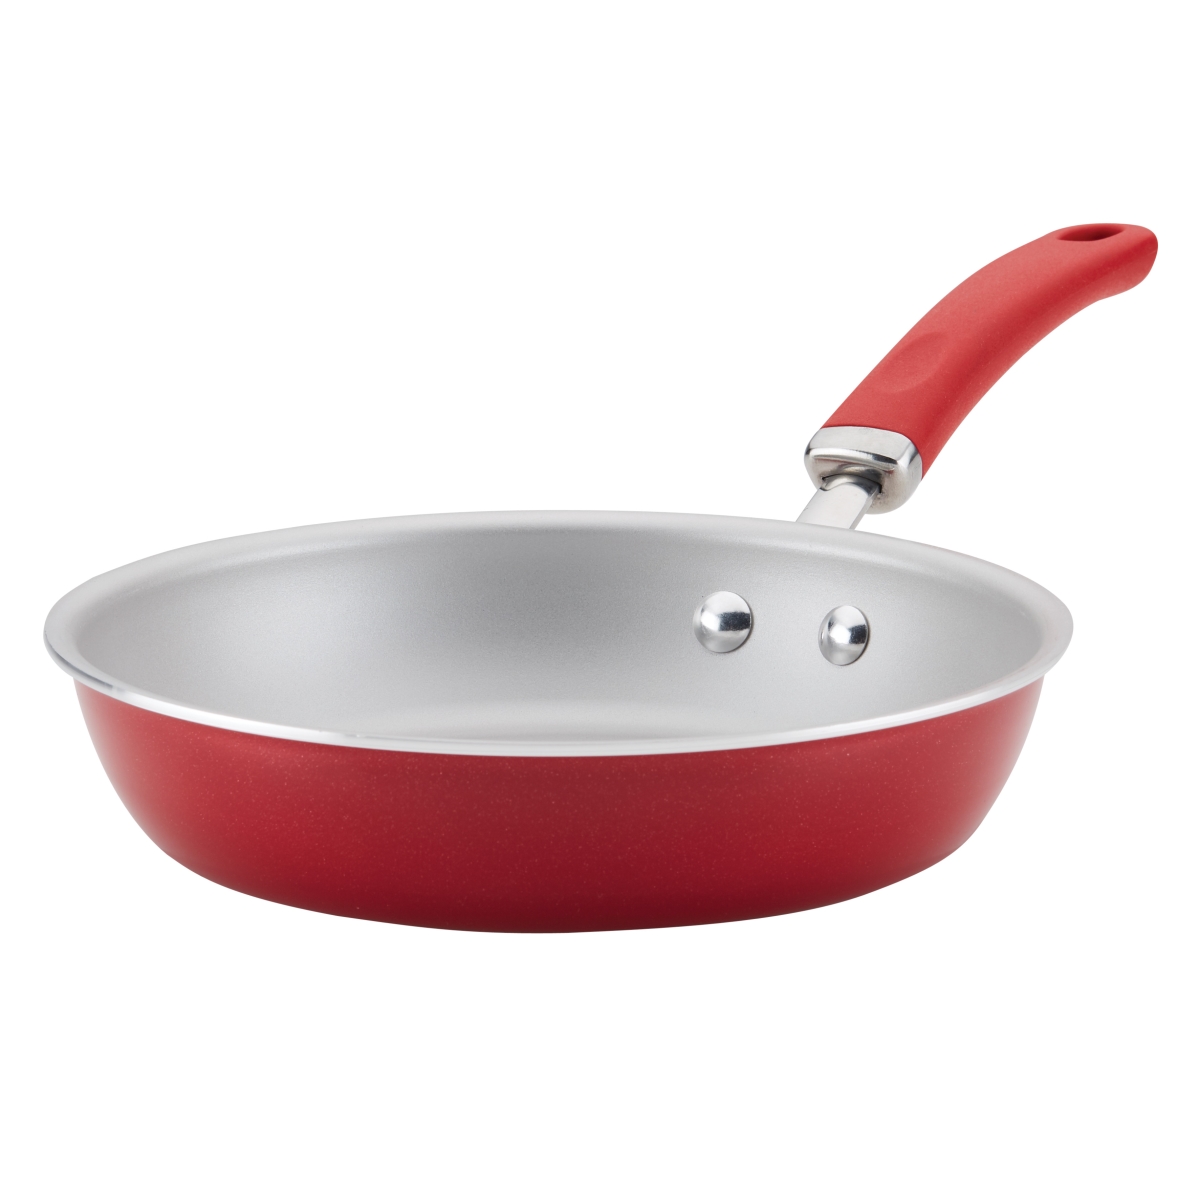 11998 Create Delicious Aluminum Nonstick Deep Skillet, 9.5 In. - Red Shimmer